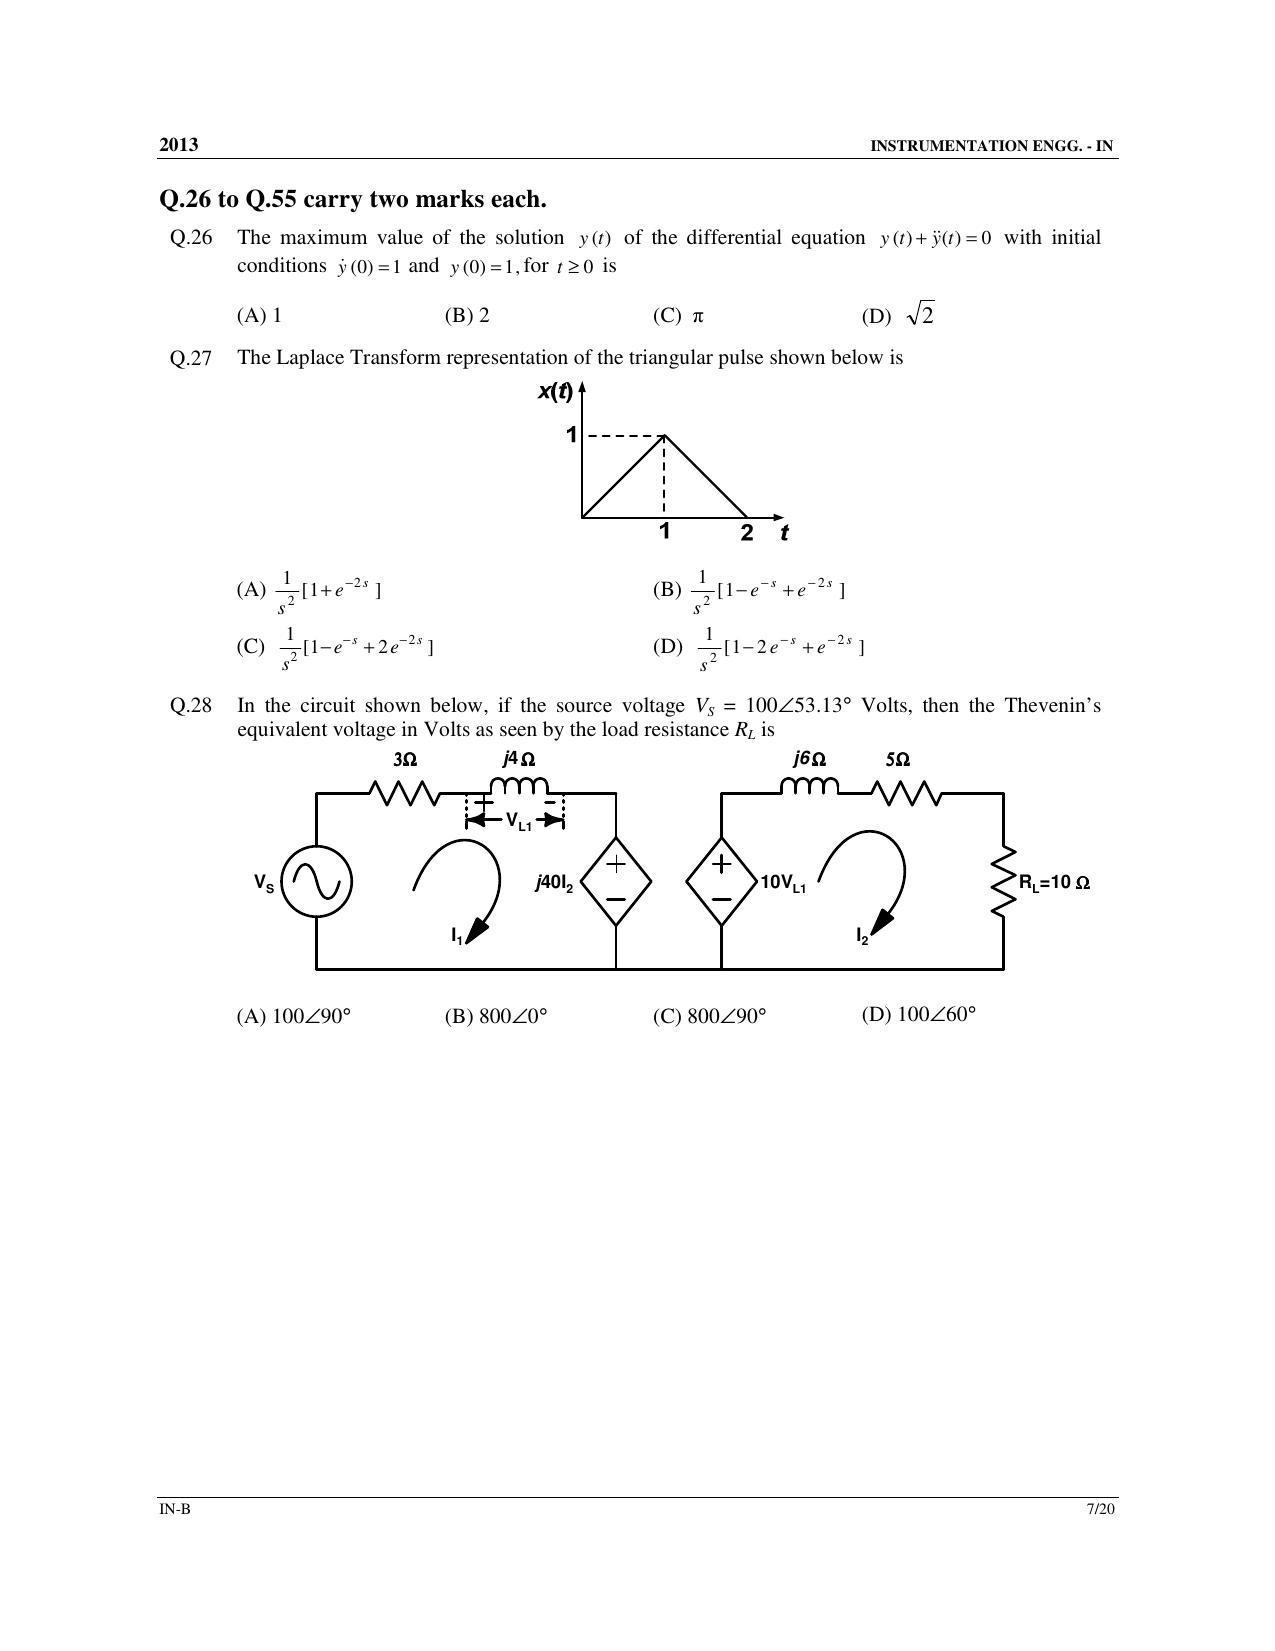 GATE 2013 Instrumentation Engineering (IN) Question Paper with Answer Key - Page 25